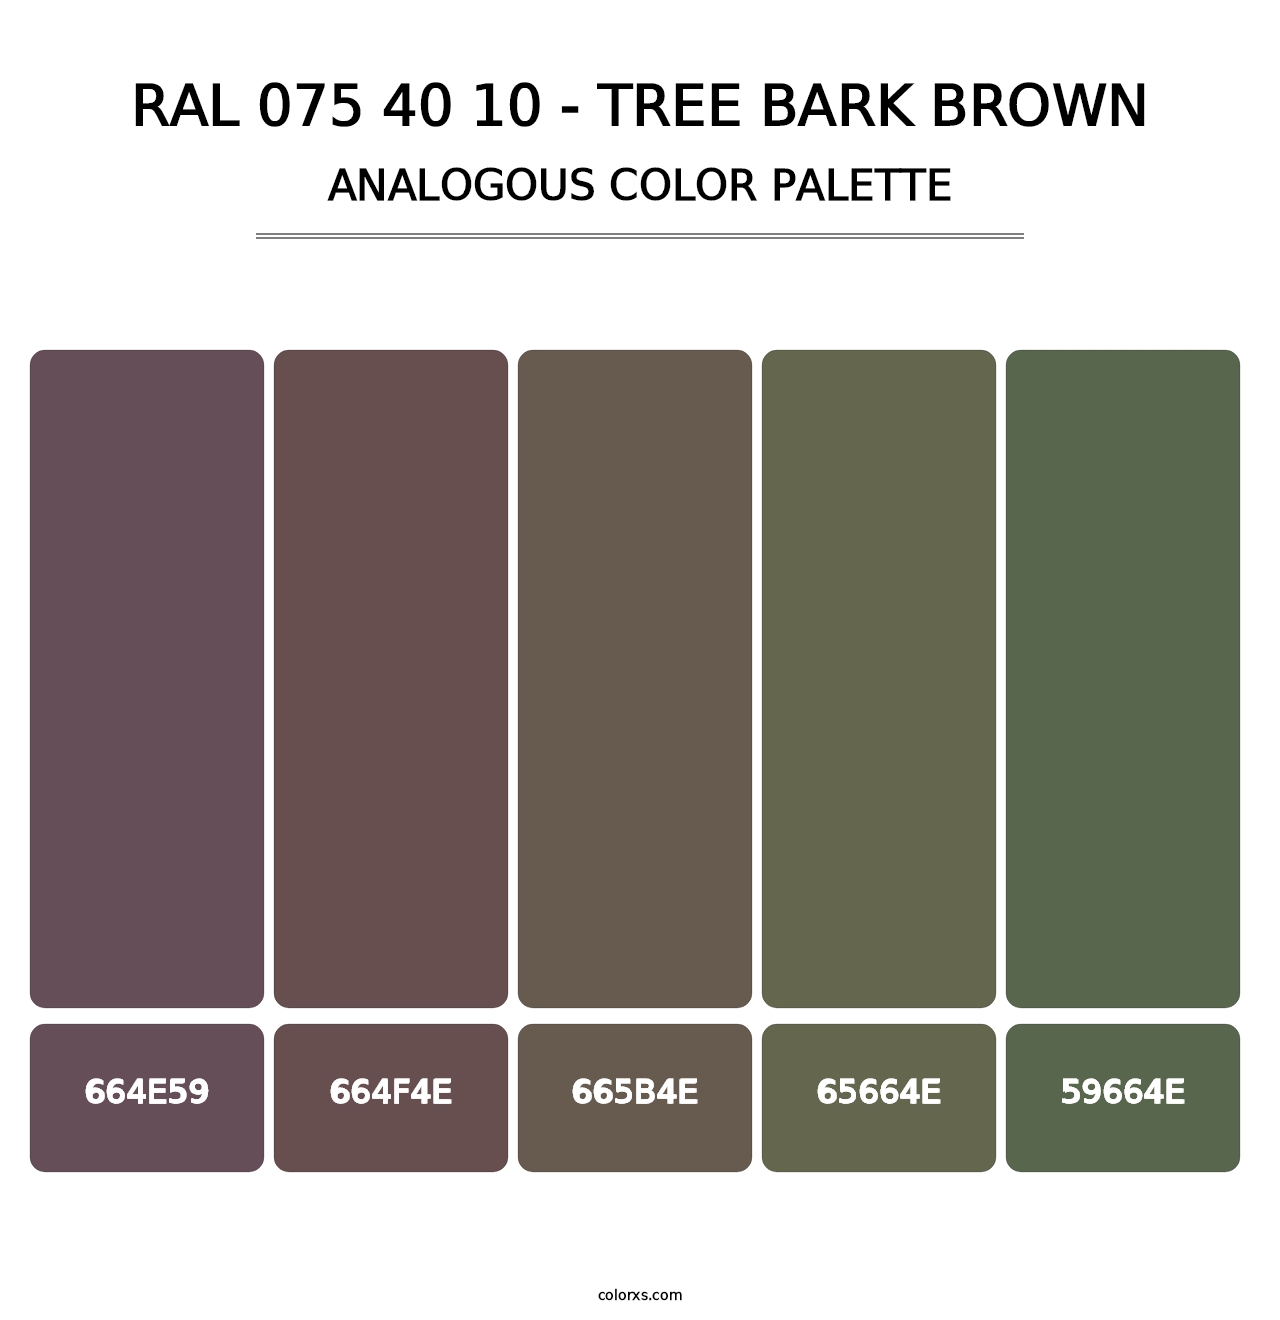 RAL 075 40 10 - Tree Bark Brown - Analogous Color Palette